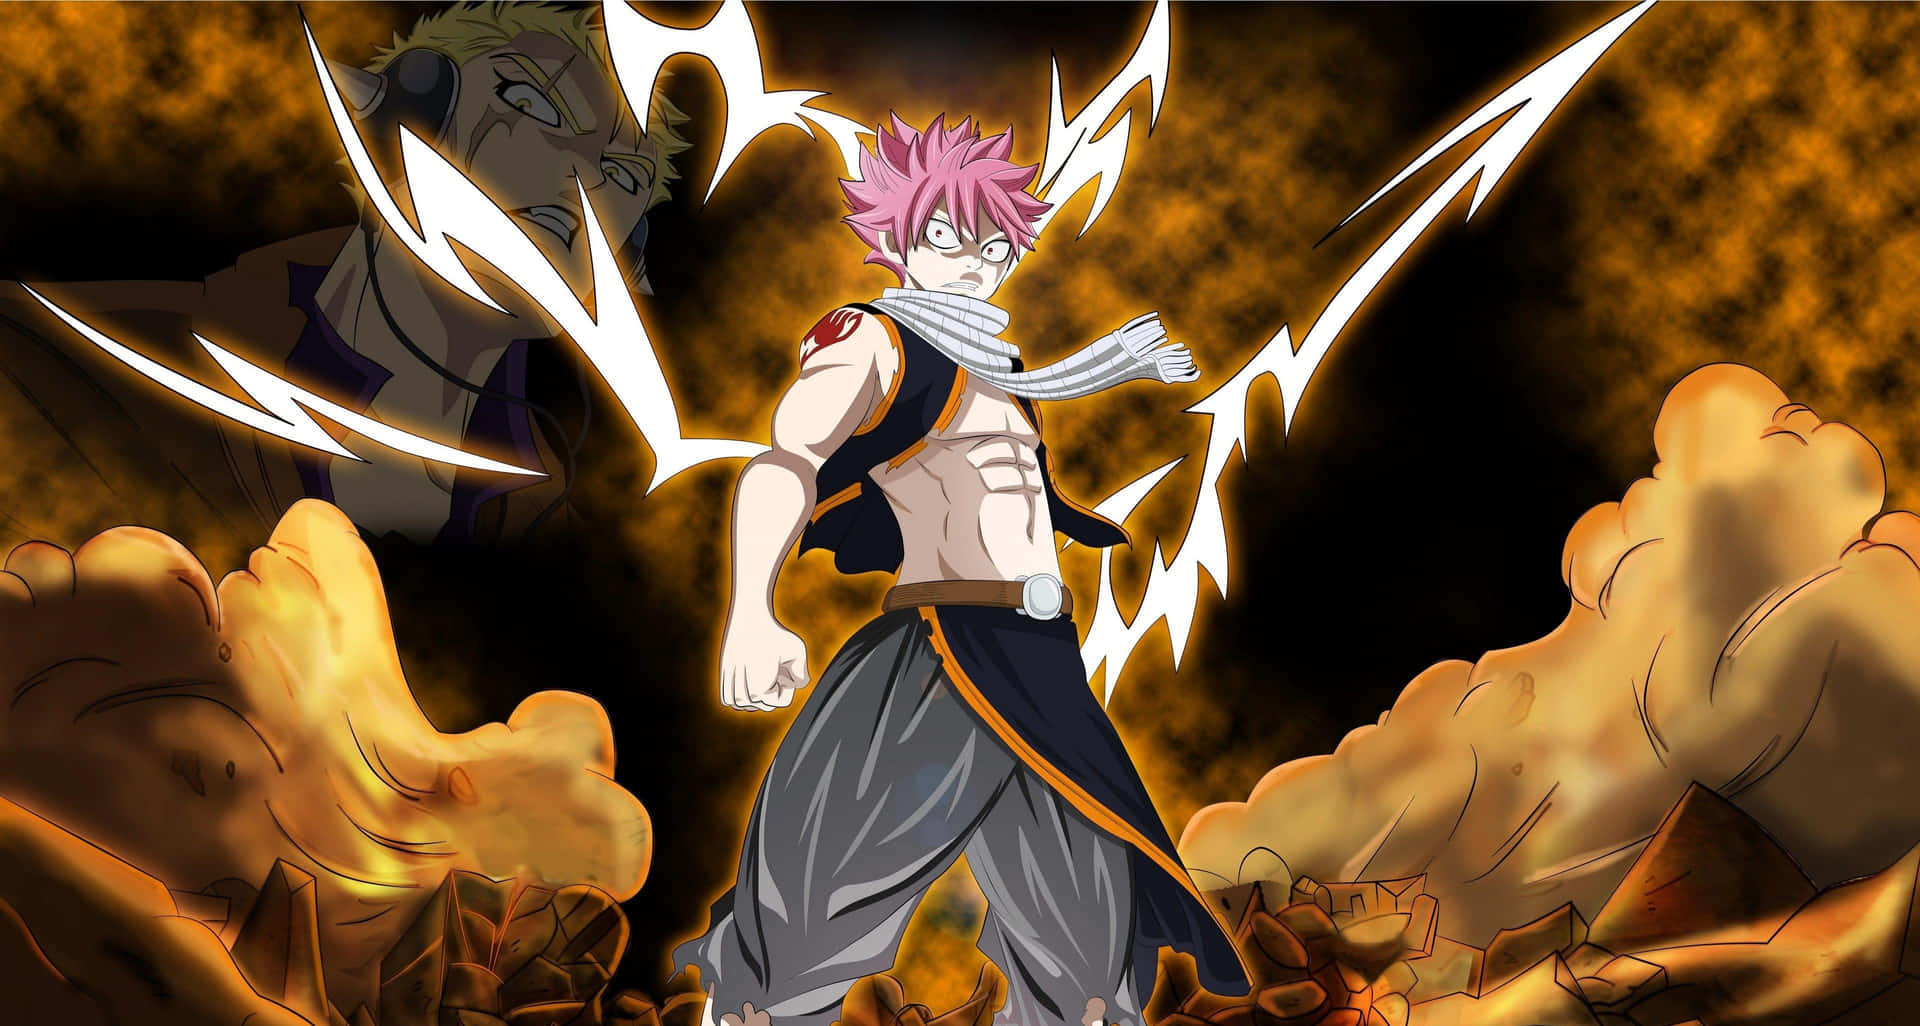 Natsu Dragneel posing with clenched fists in front of a fiery background Wallpaper